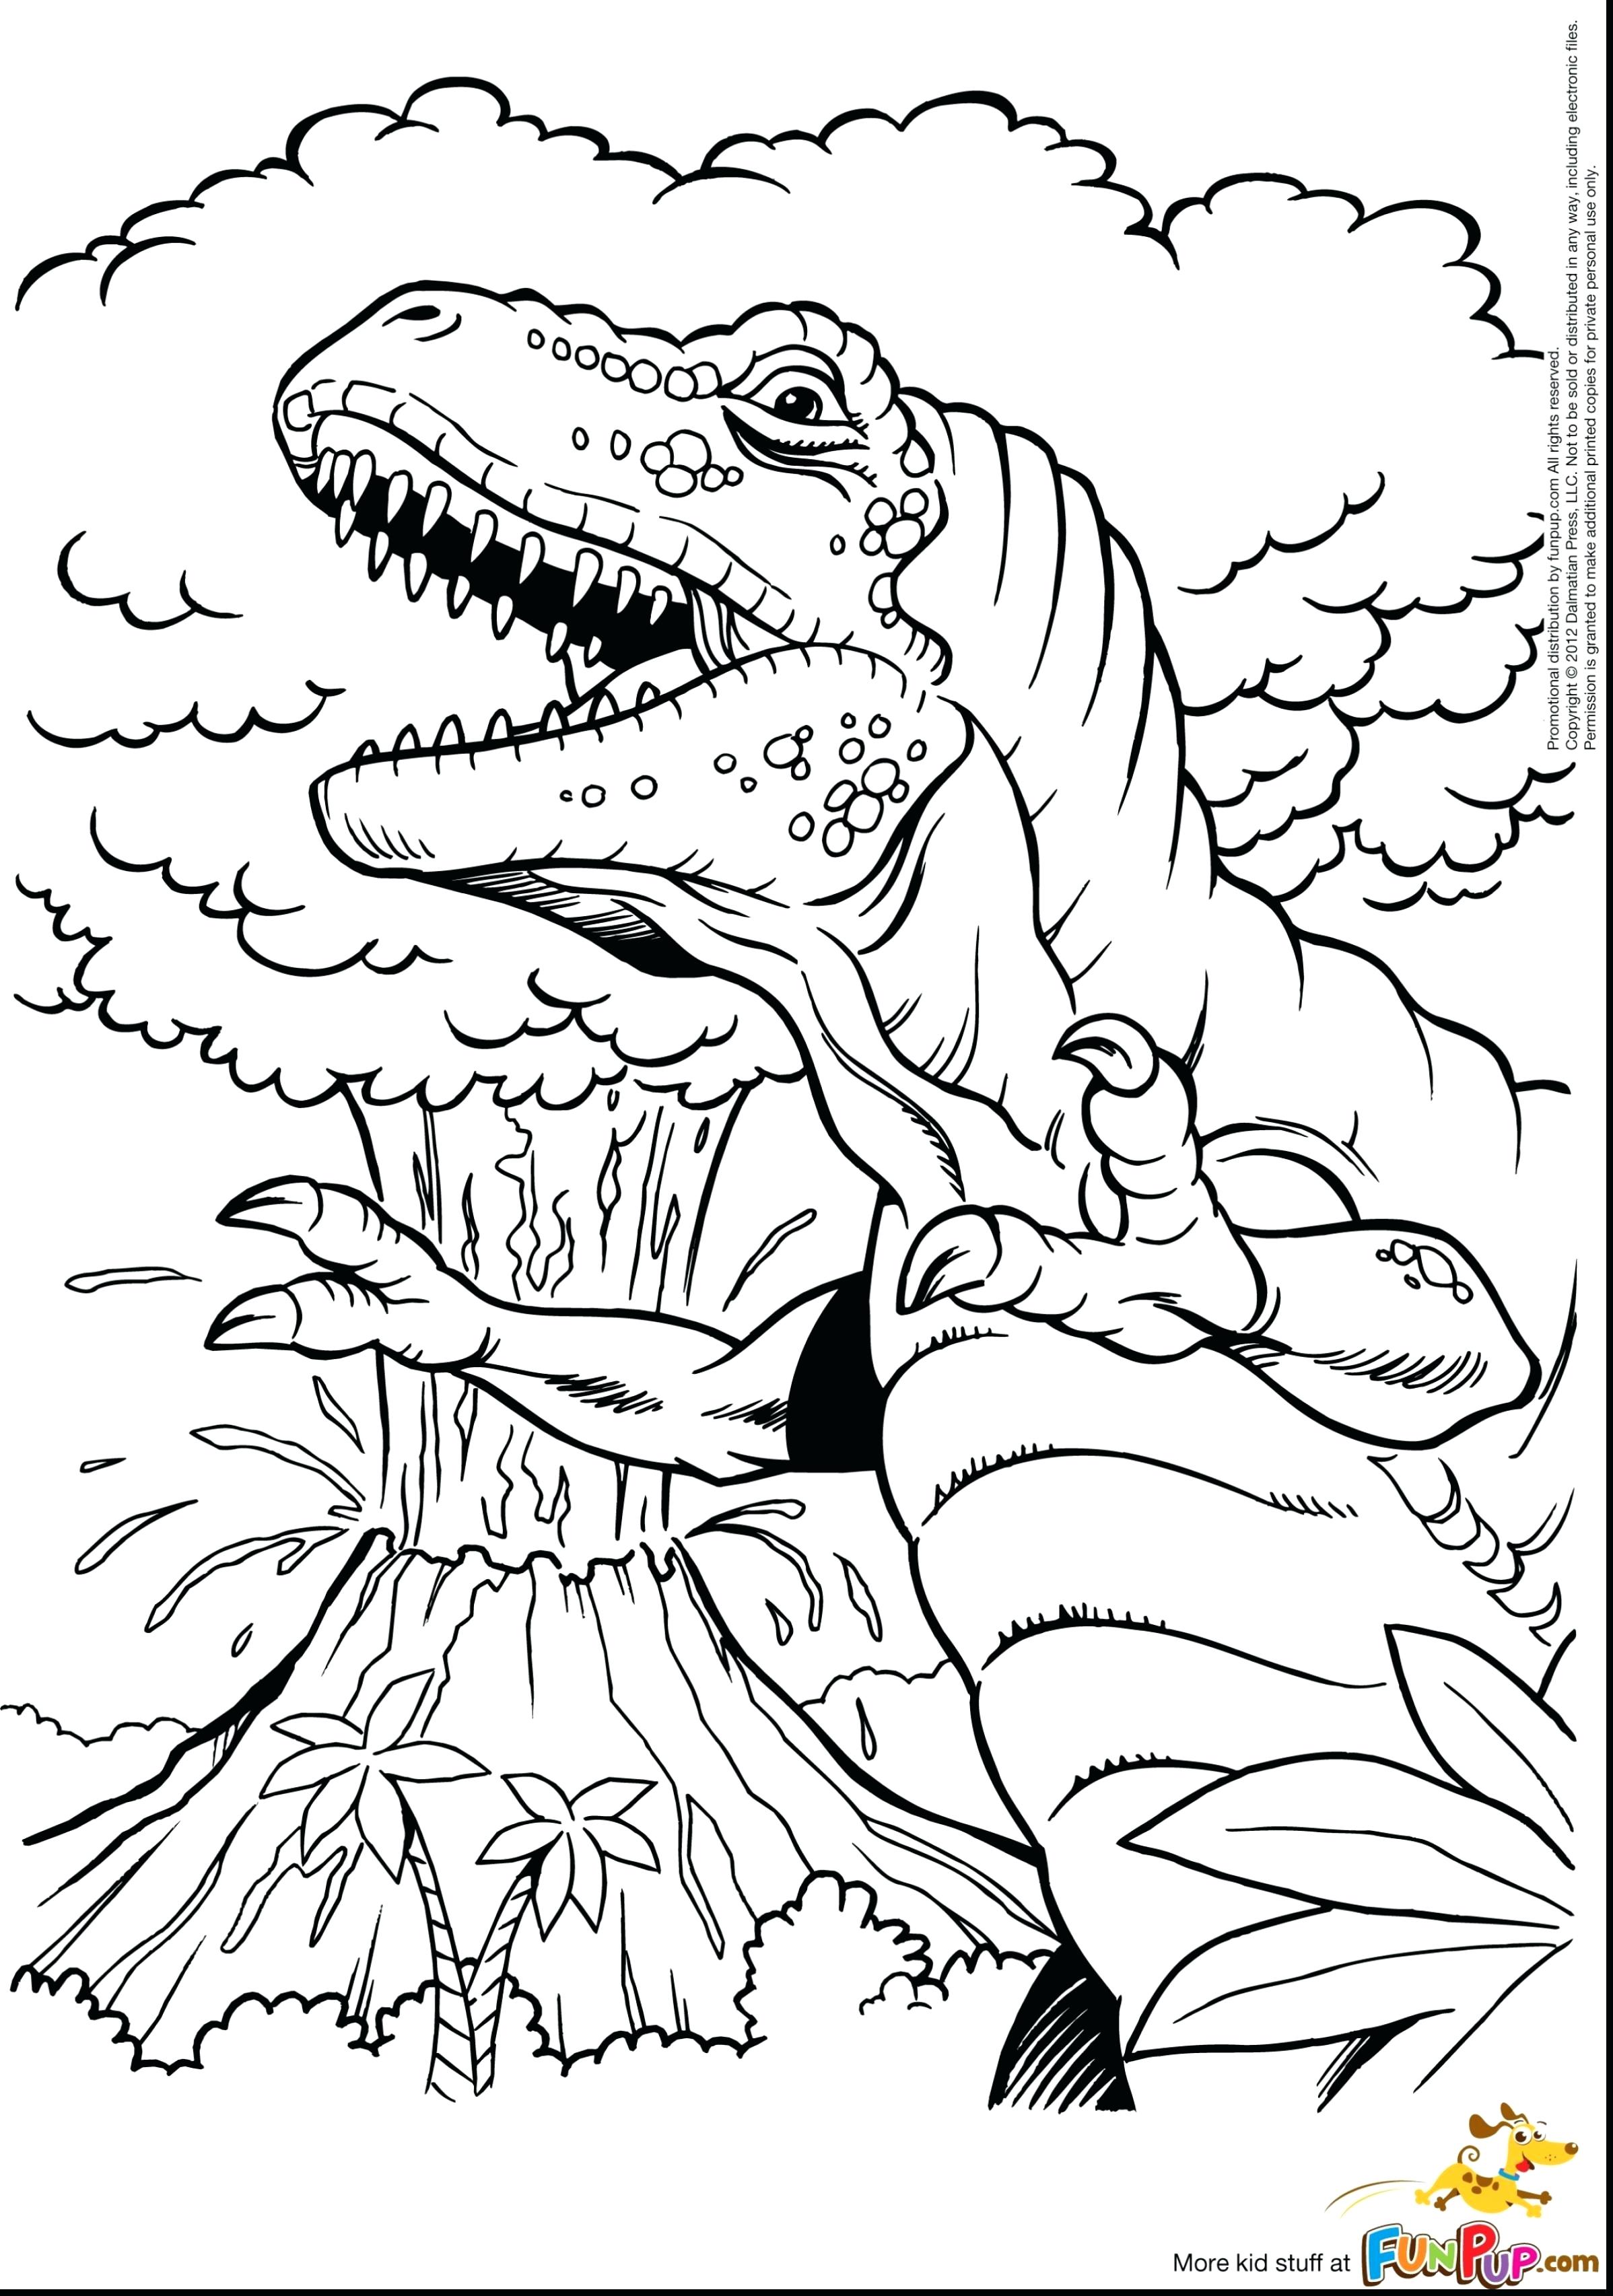 T Rex Dinosaur Coloring Pages at GetColorings.com | Free printable